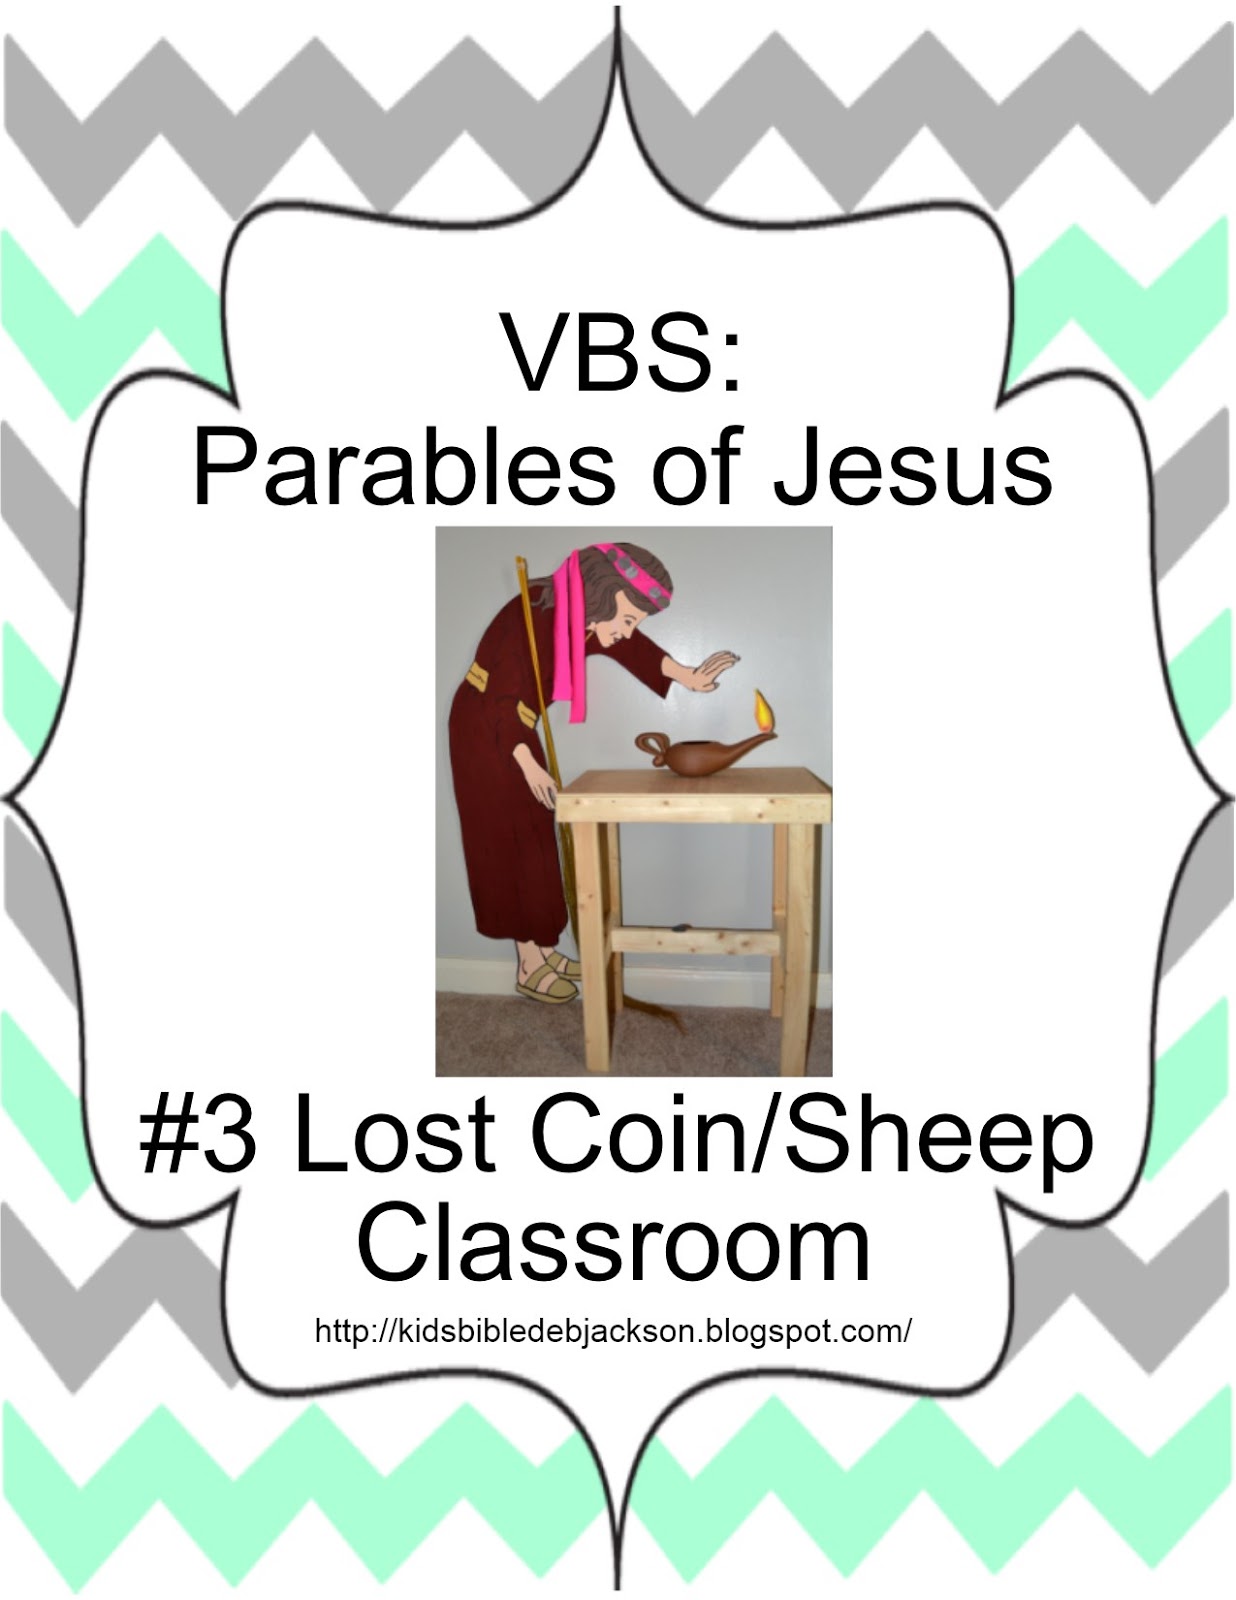 http://kidsbibledebjackson.blogspot.com/2014/06/parables-of-jesus-vbs-day-3the-lost.html